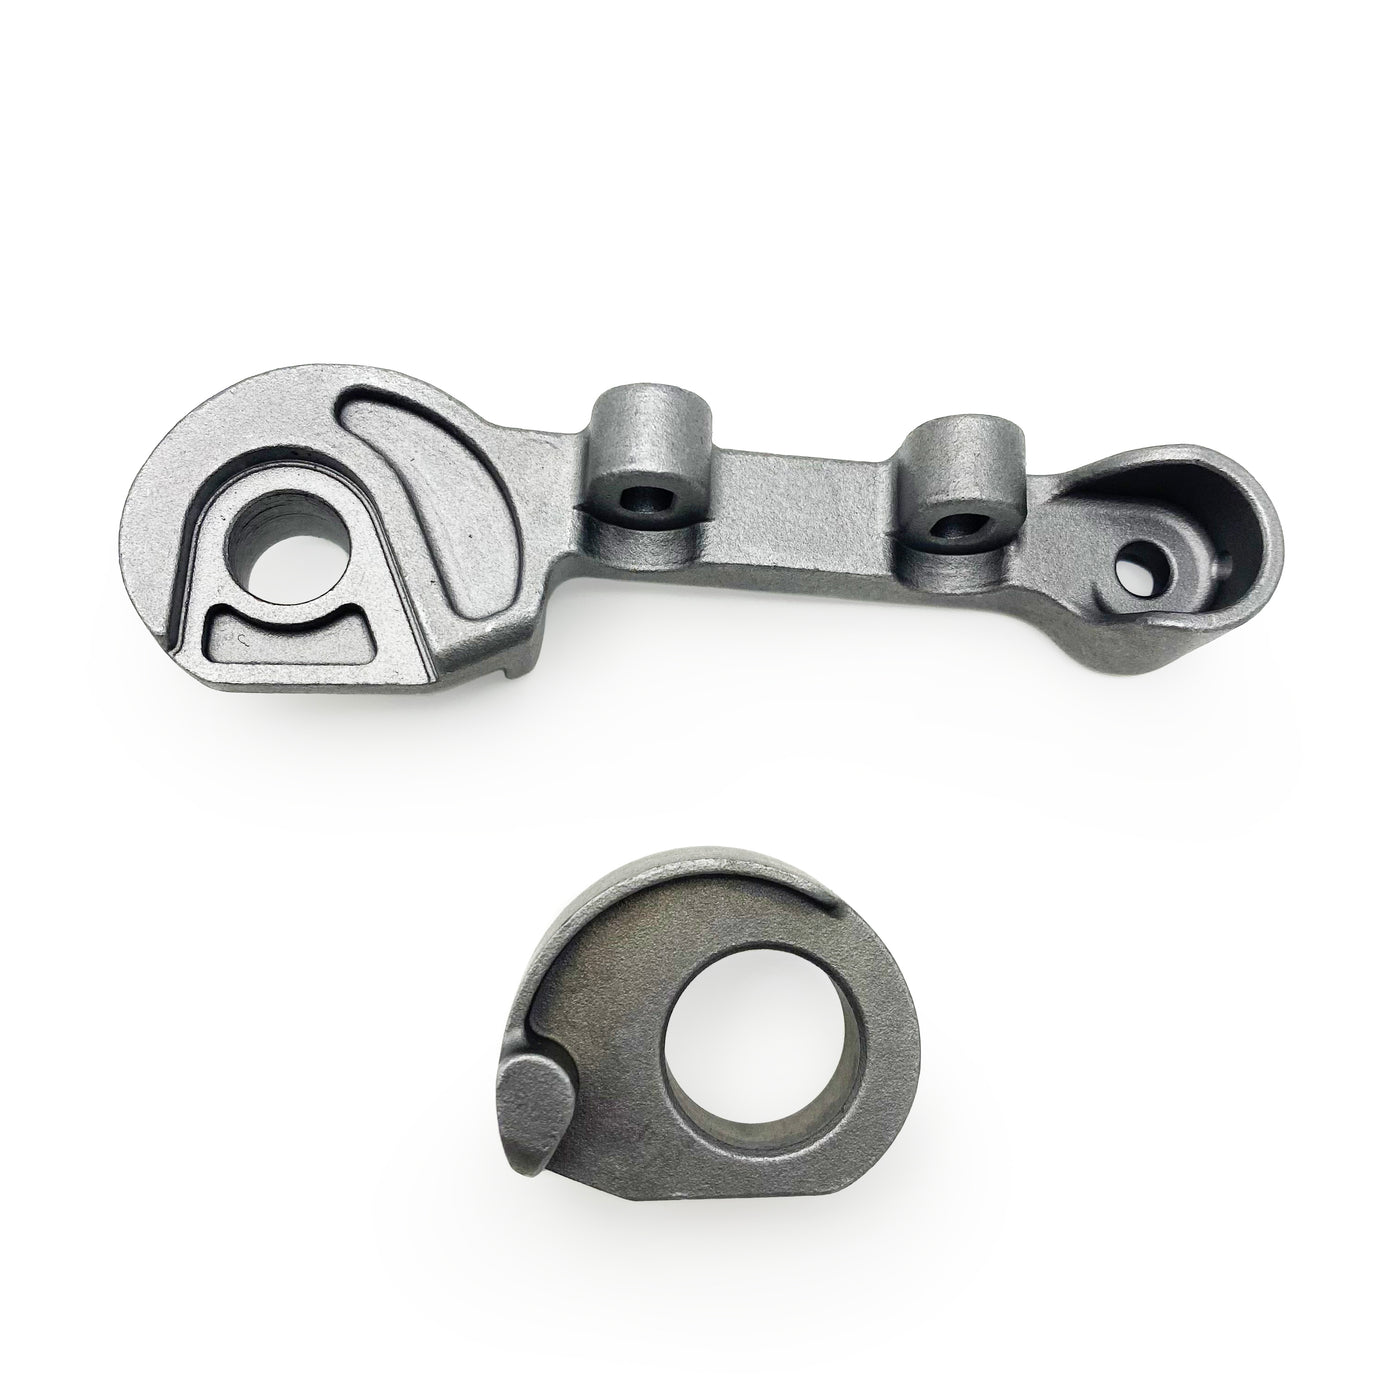 Hooded rear thru-axle dropout for flat-mount disc brakes for SRAM Universal Derailleur Hanger